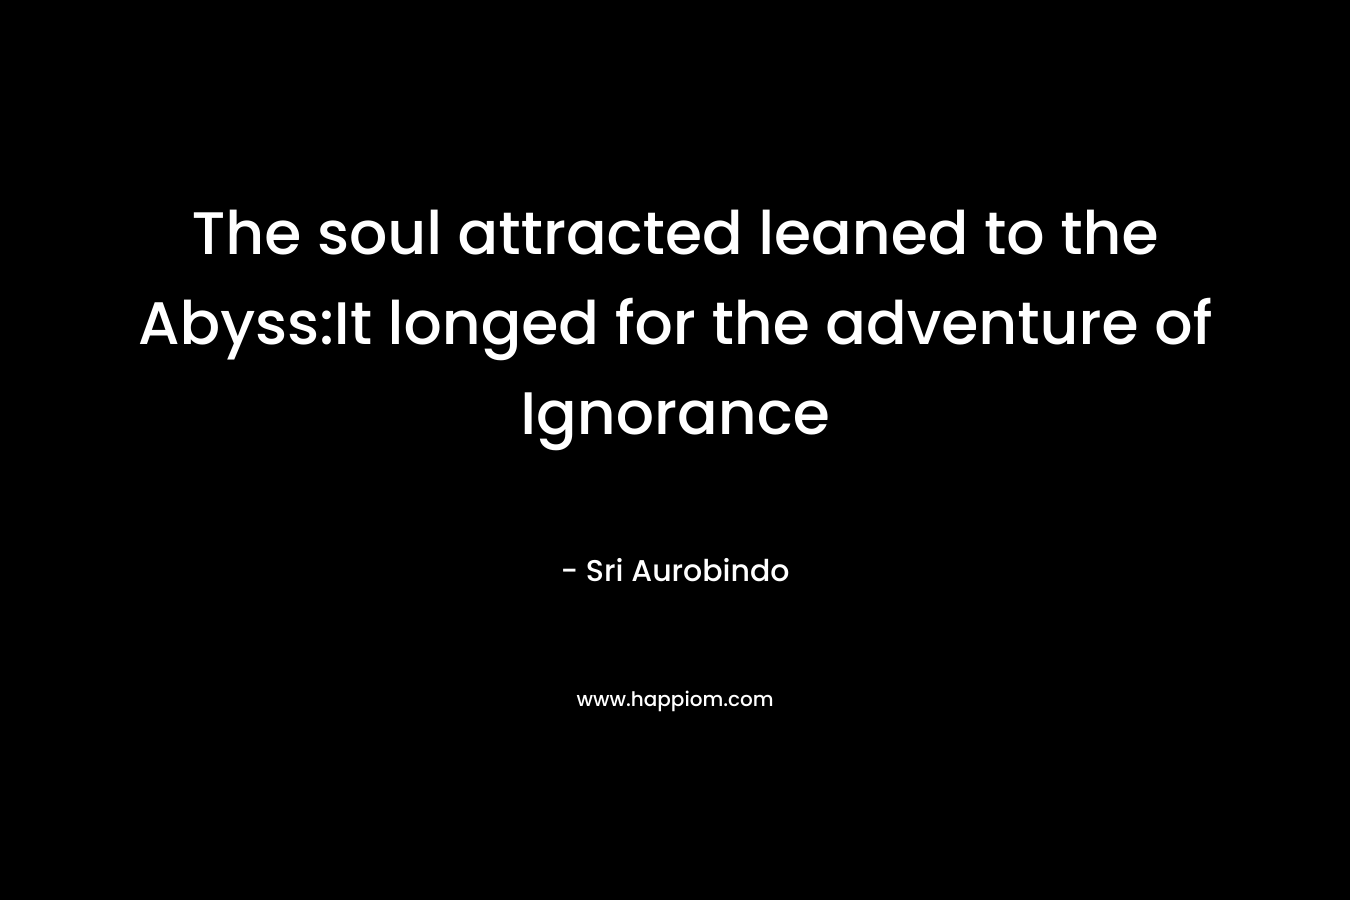 The soul attracted leaned to the Abyss:It longed for the adventure of Ignorance – Sri Aurobindo